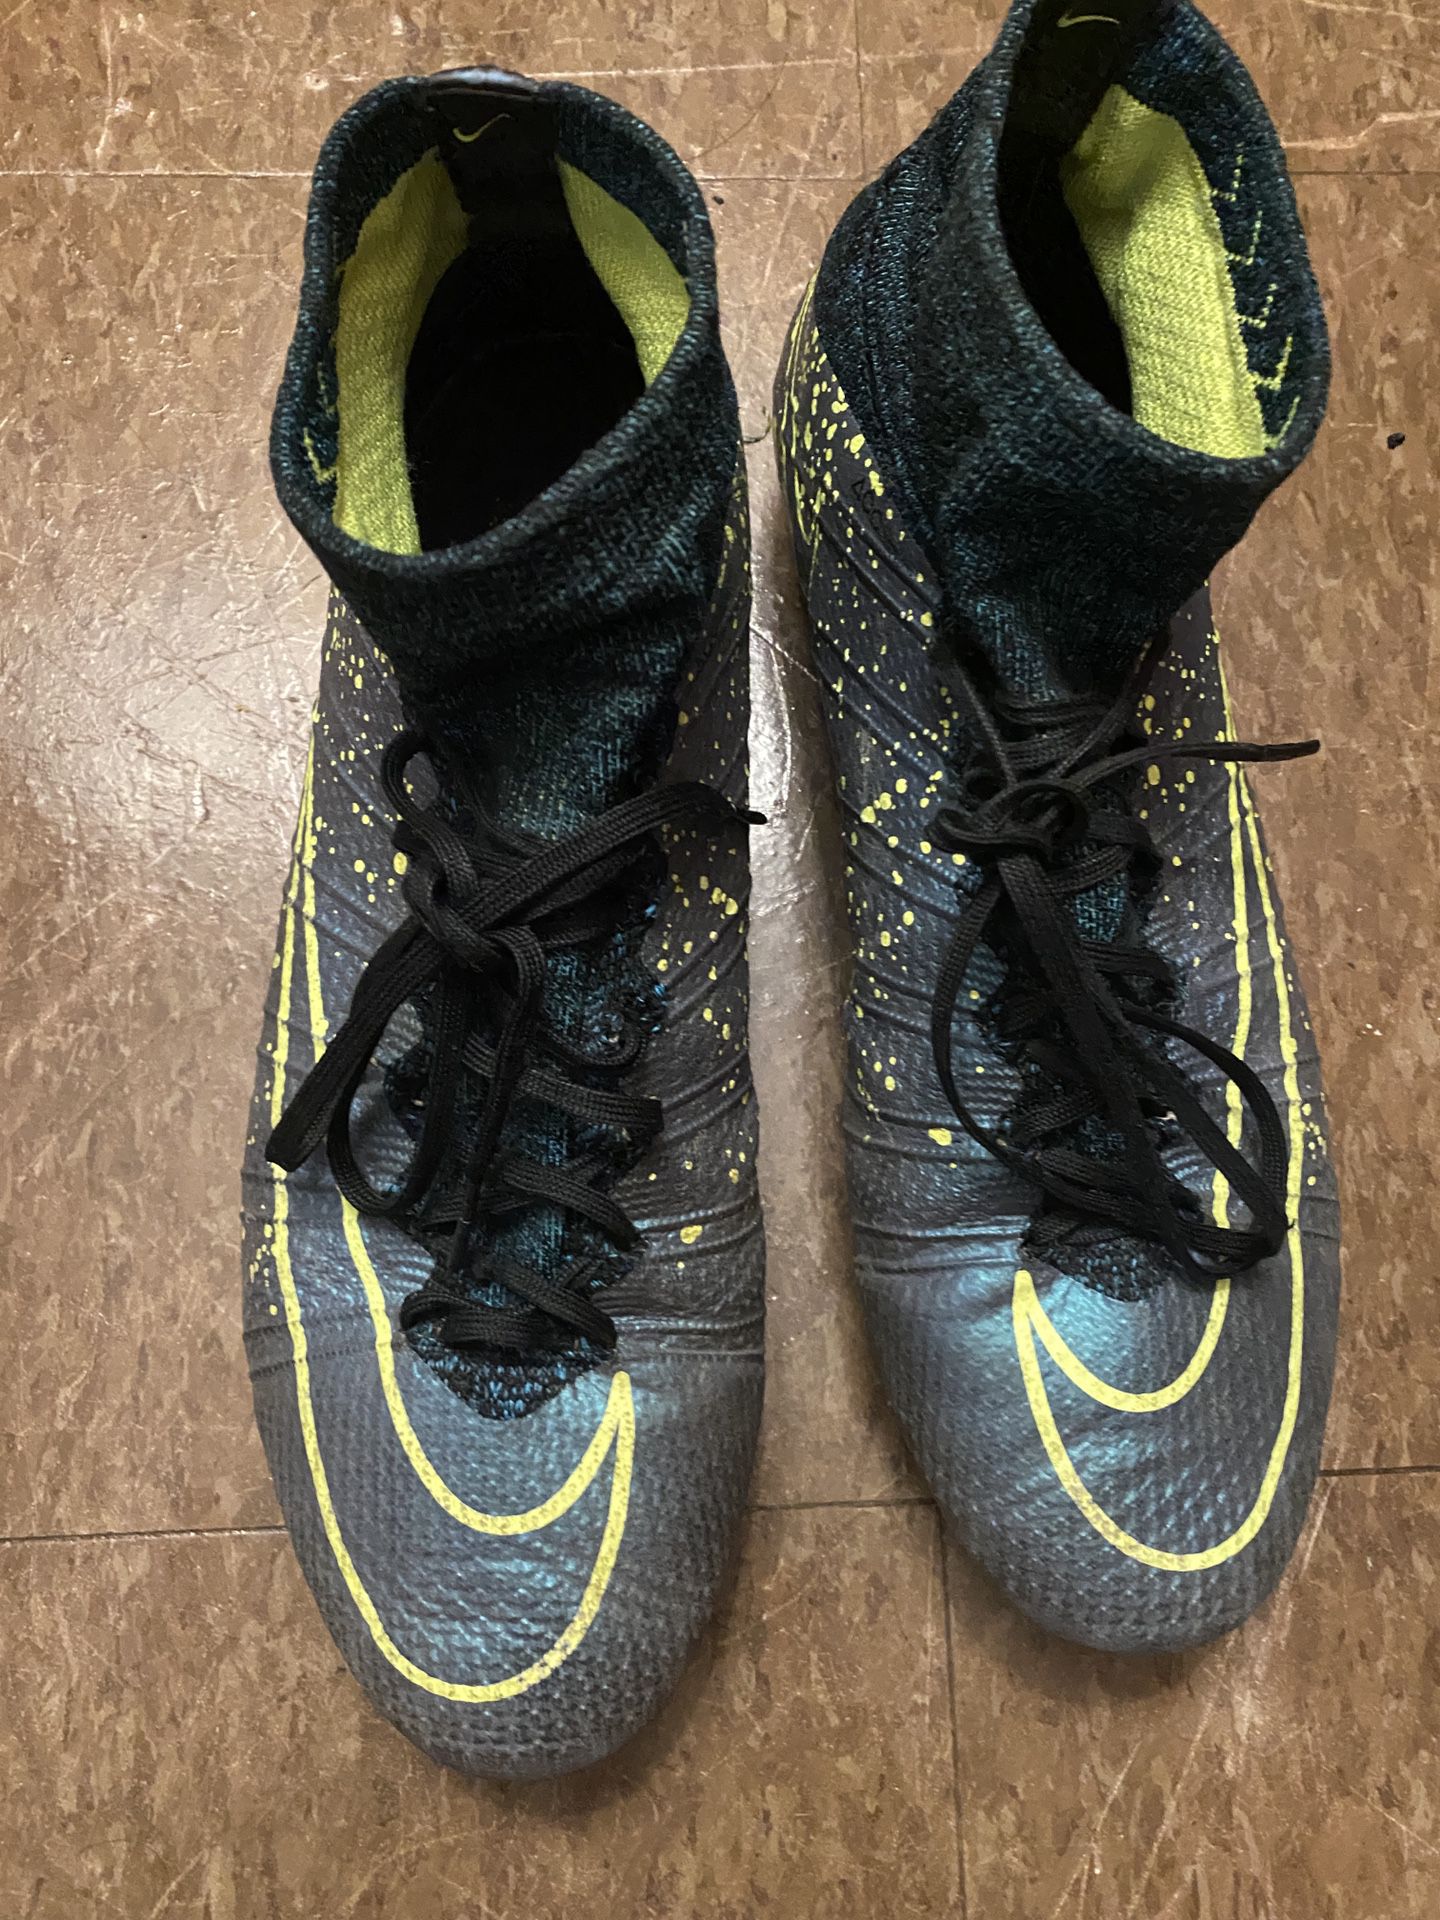 Nike Superfly 4 for in Williamsville, NY - OfferUp